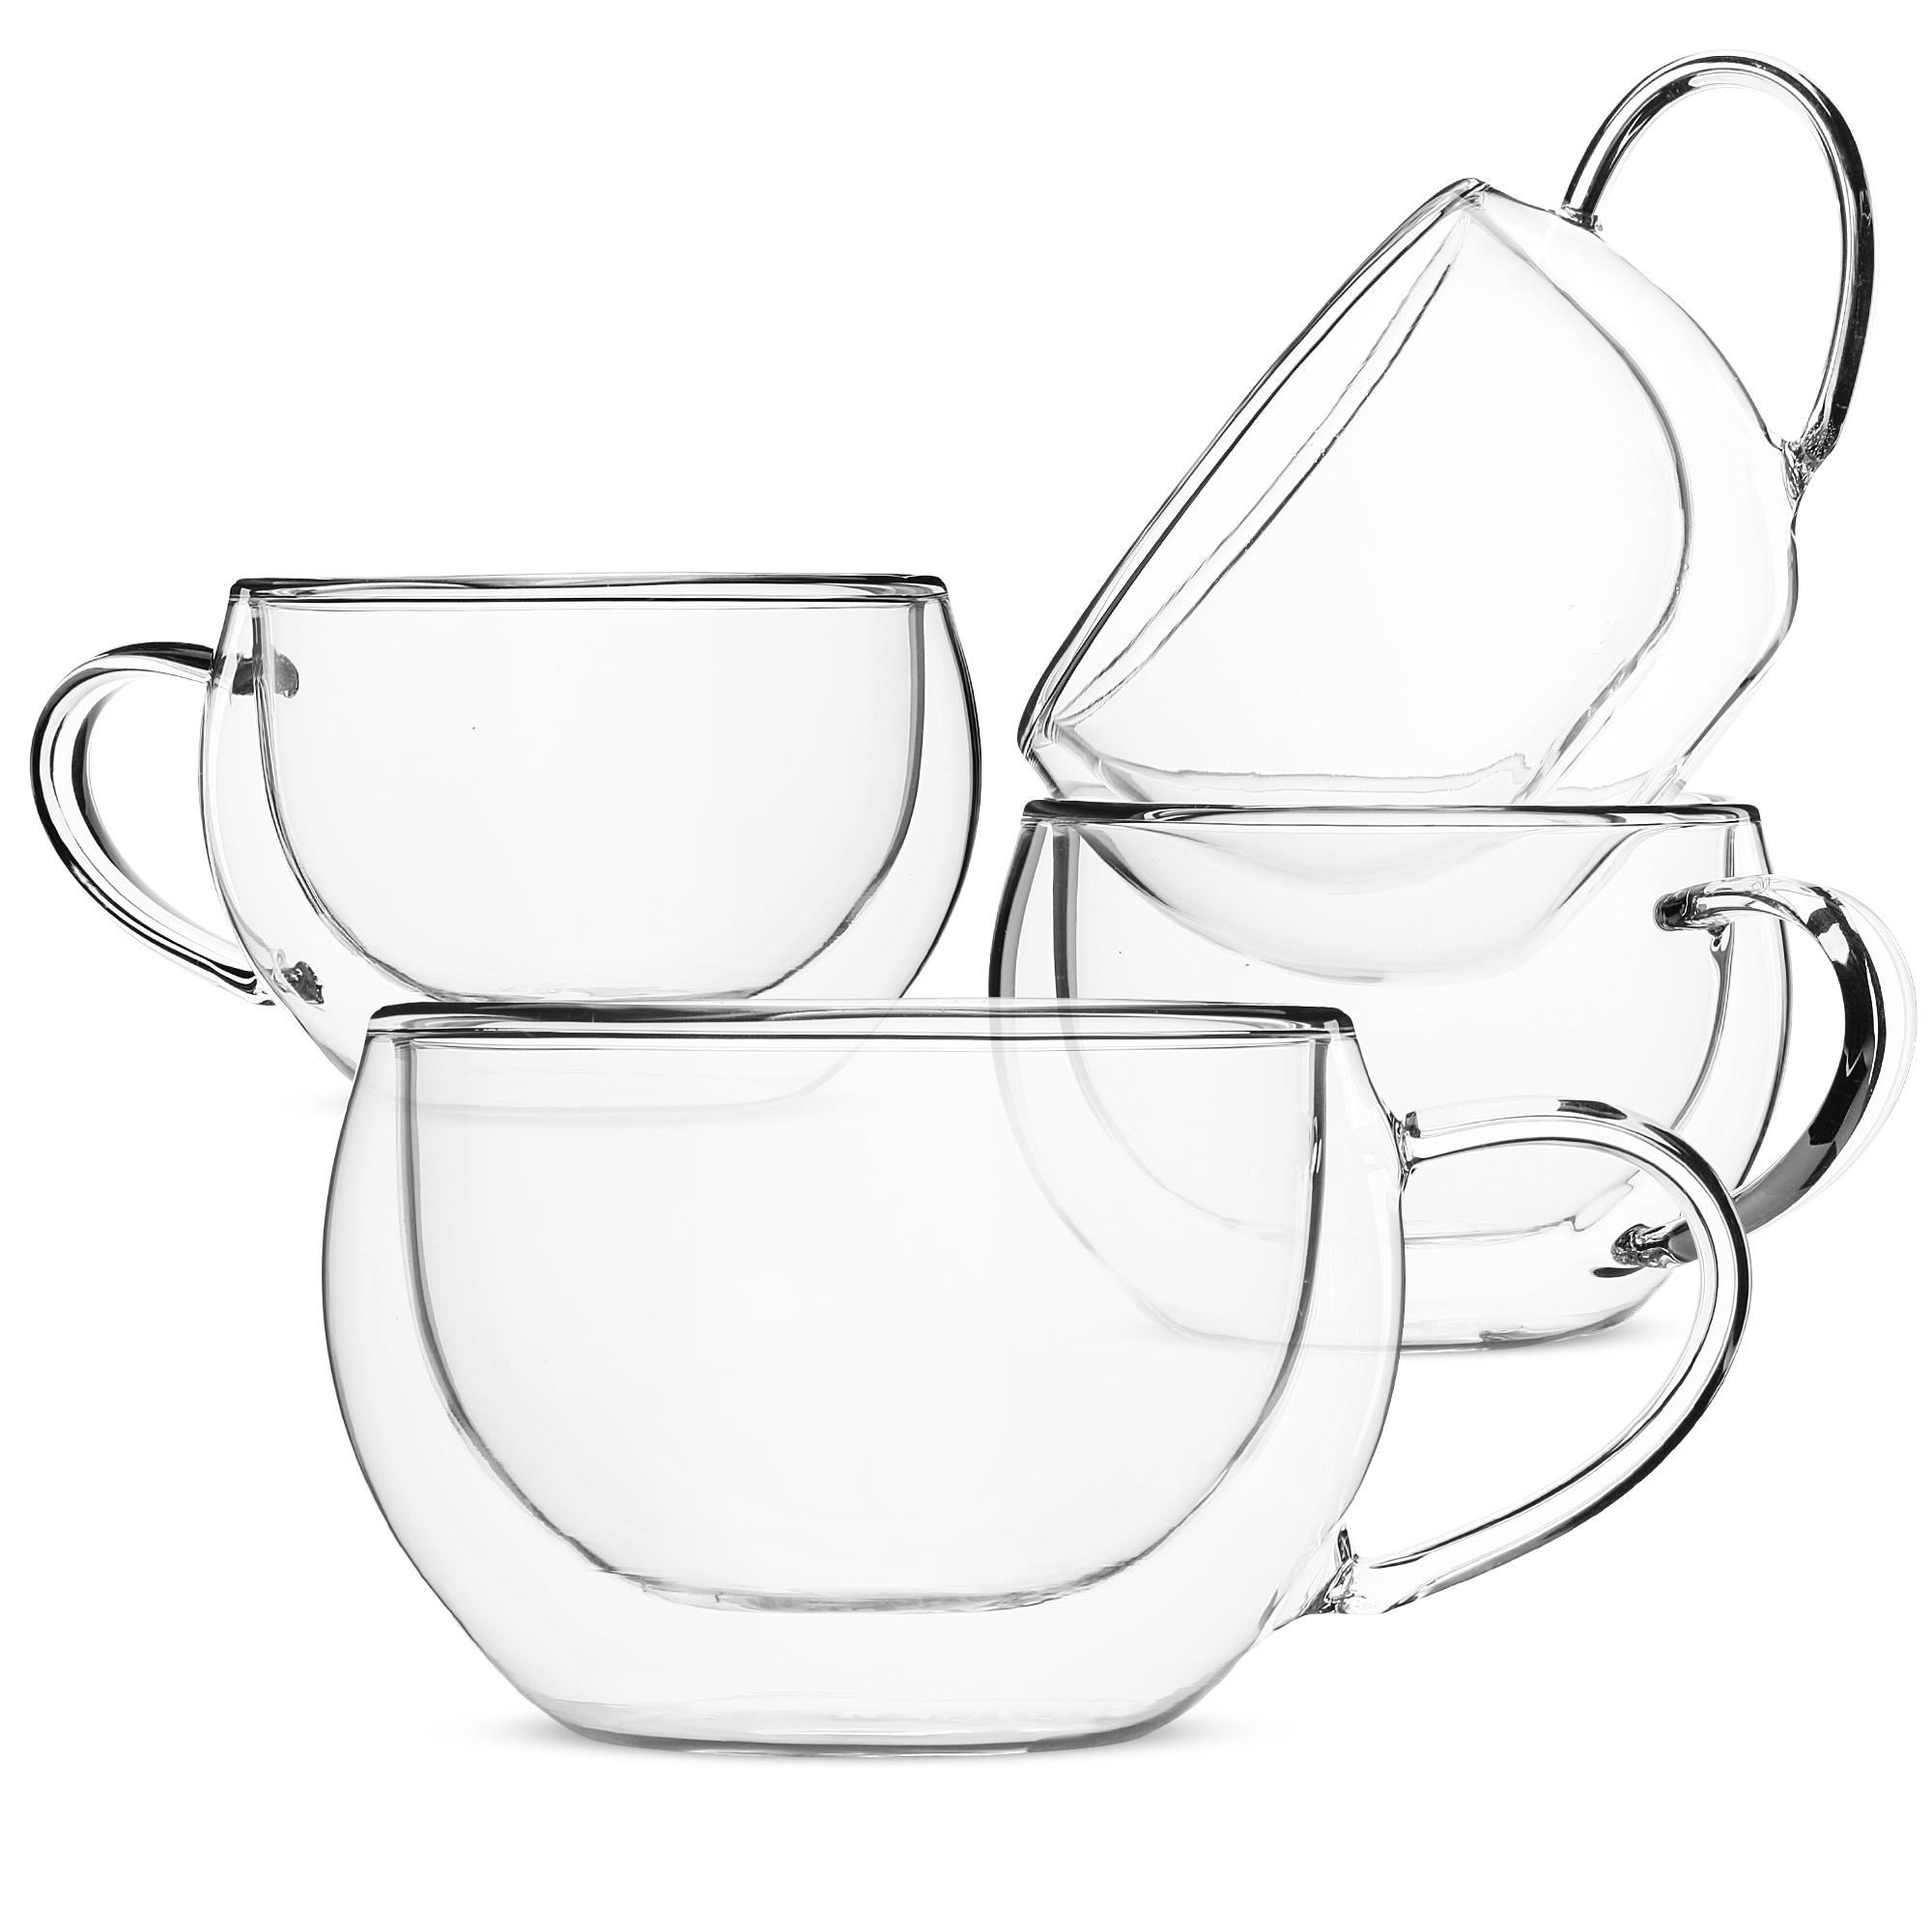 BTaT- Stackable Espresso Cups, Demitasse Cups, Set of 4 (5.0 oz, 150 ml),  Glass Coffee Mugs, Double Wall Glass Cups, Clear Coffee Cup, Tea Glass